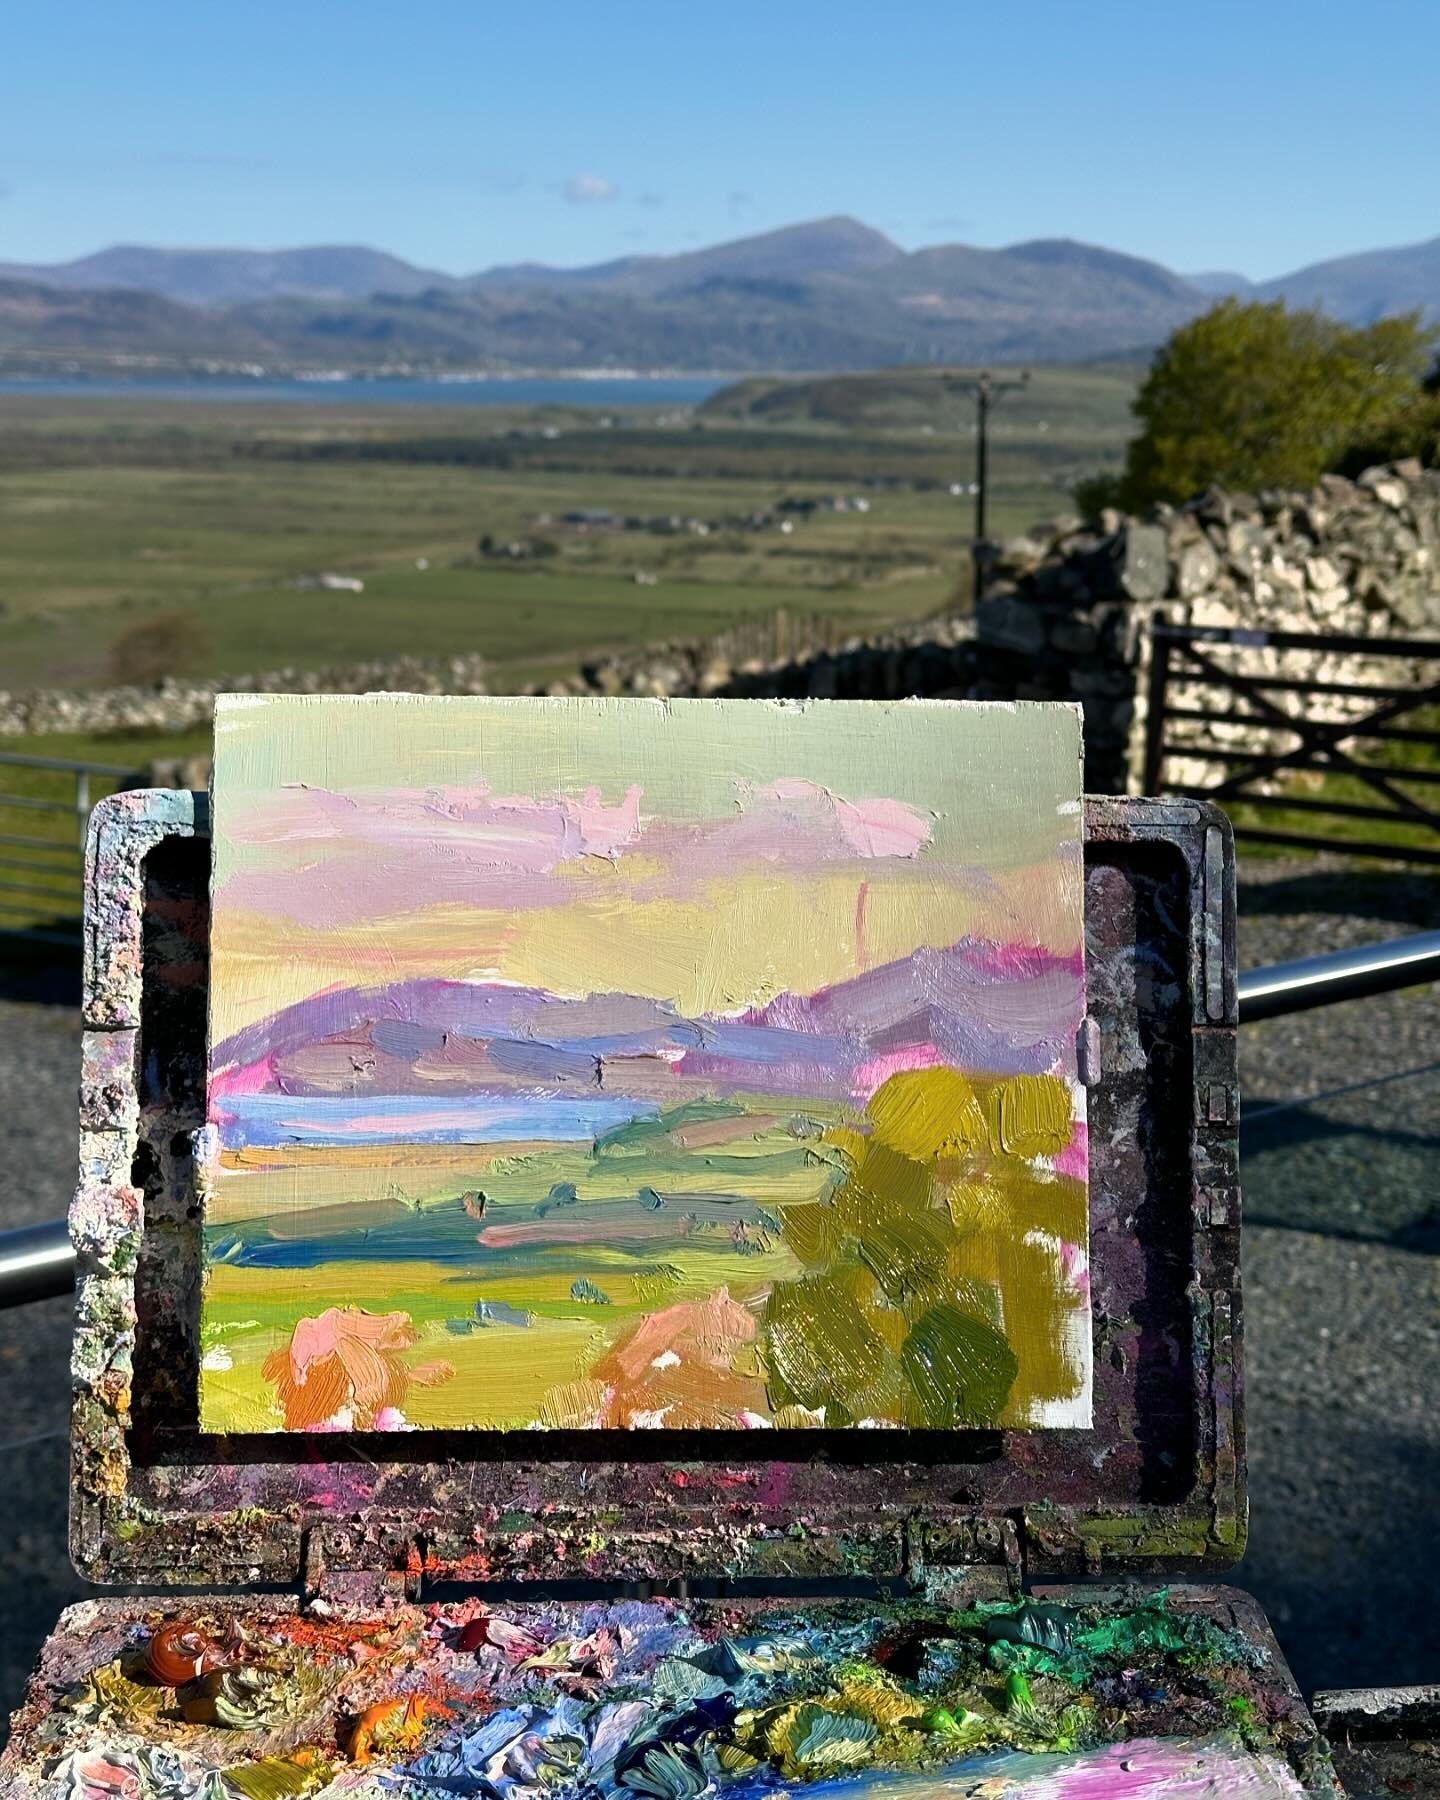 2 early morning paints in Wales looking over Harlech beach with @sarahmanolescueartist and @georginapotterartist 

Off to the beach 🏖️ 

#paintingfromlife #pleinair #oilpainting #harlech #wales #snowdonia